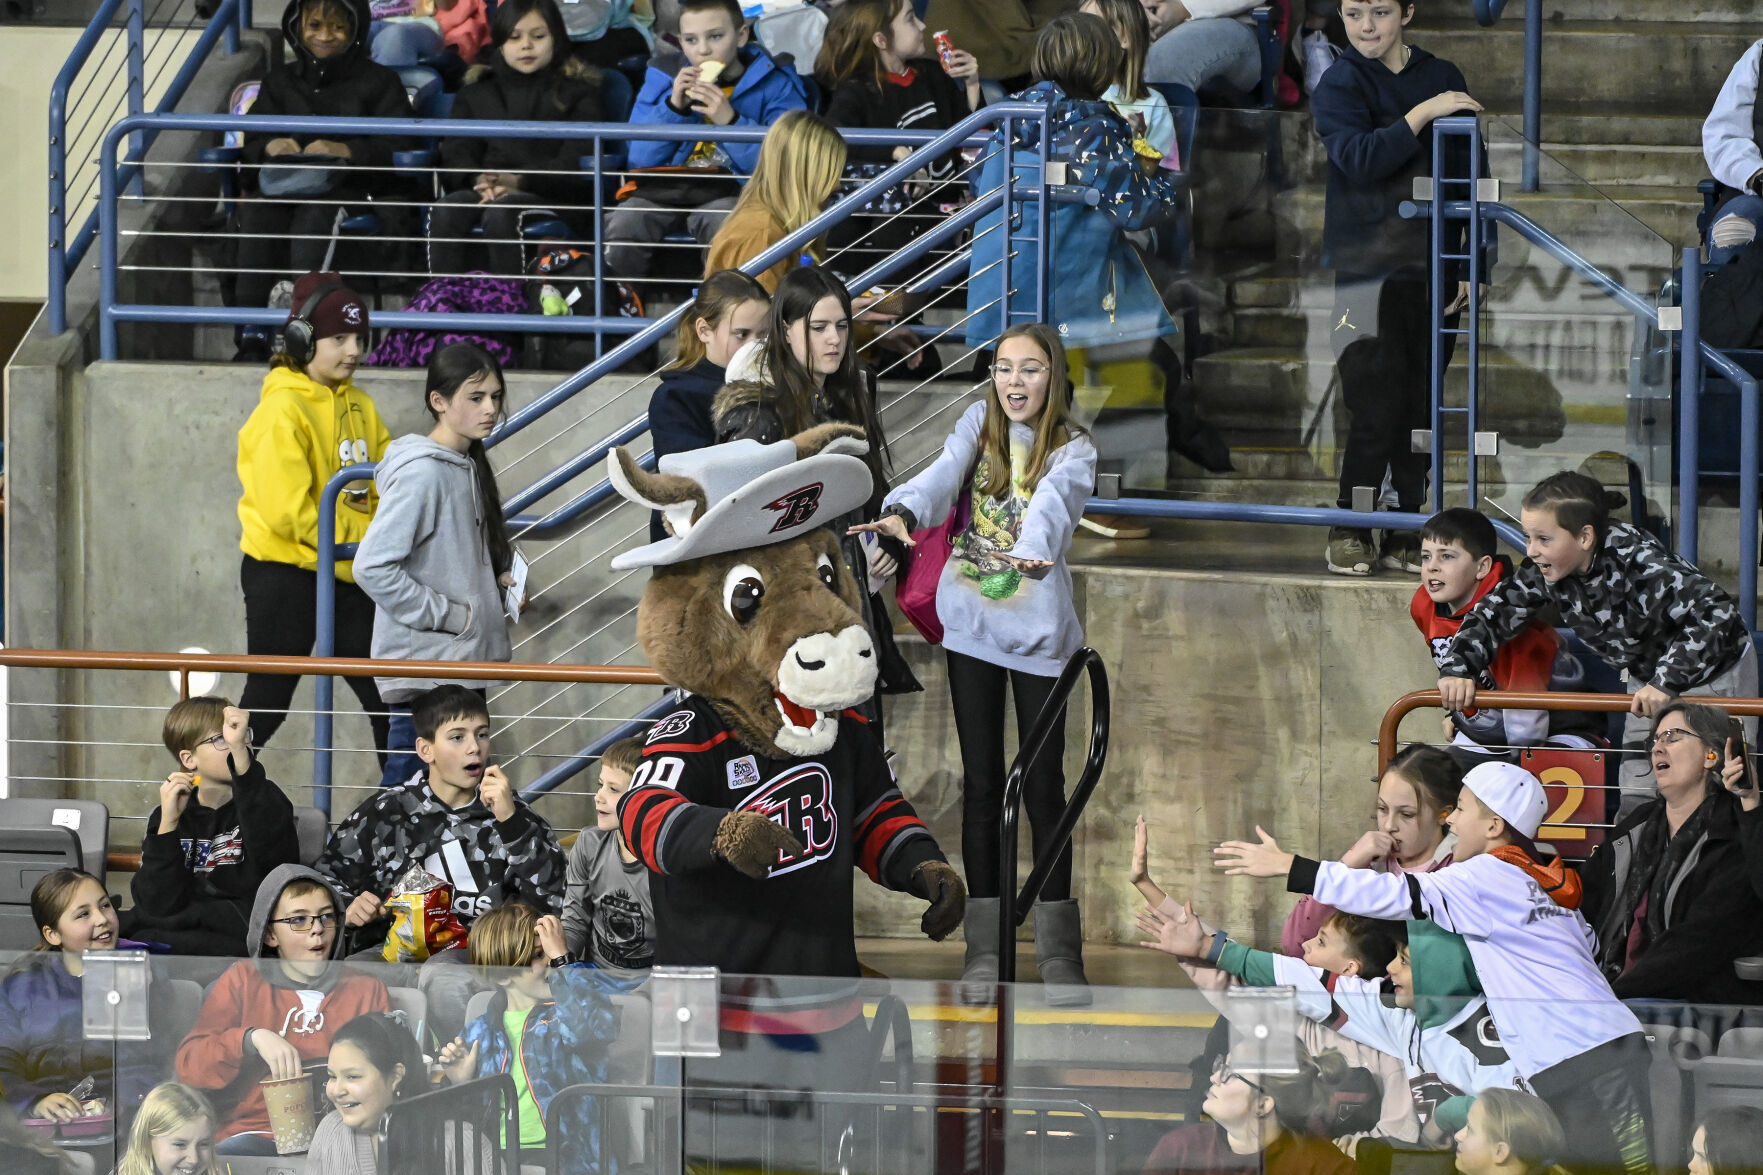 PHOTOS: Thousands of students attend Rapid City Rush's 5th Annual